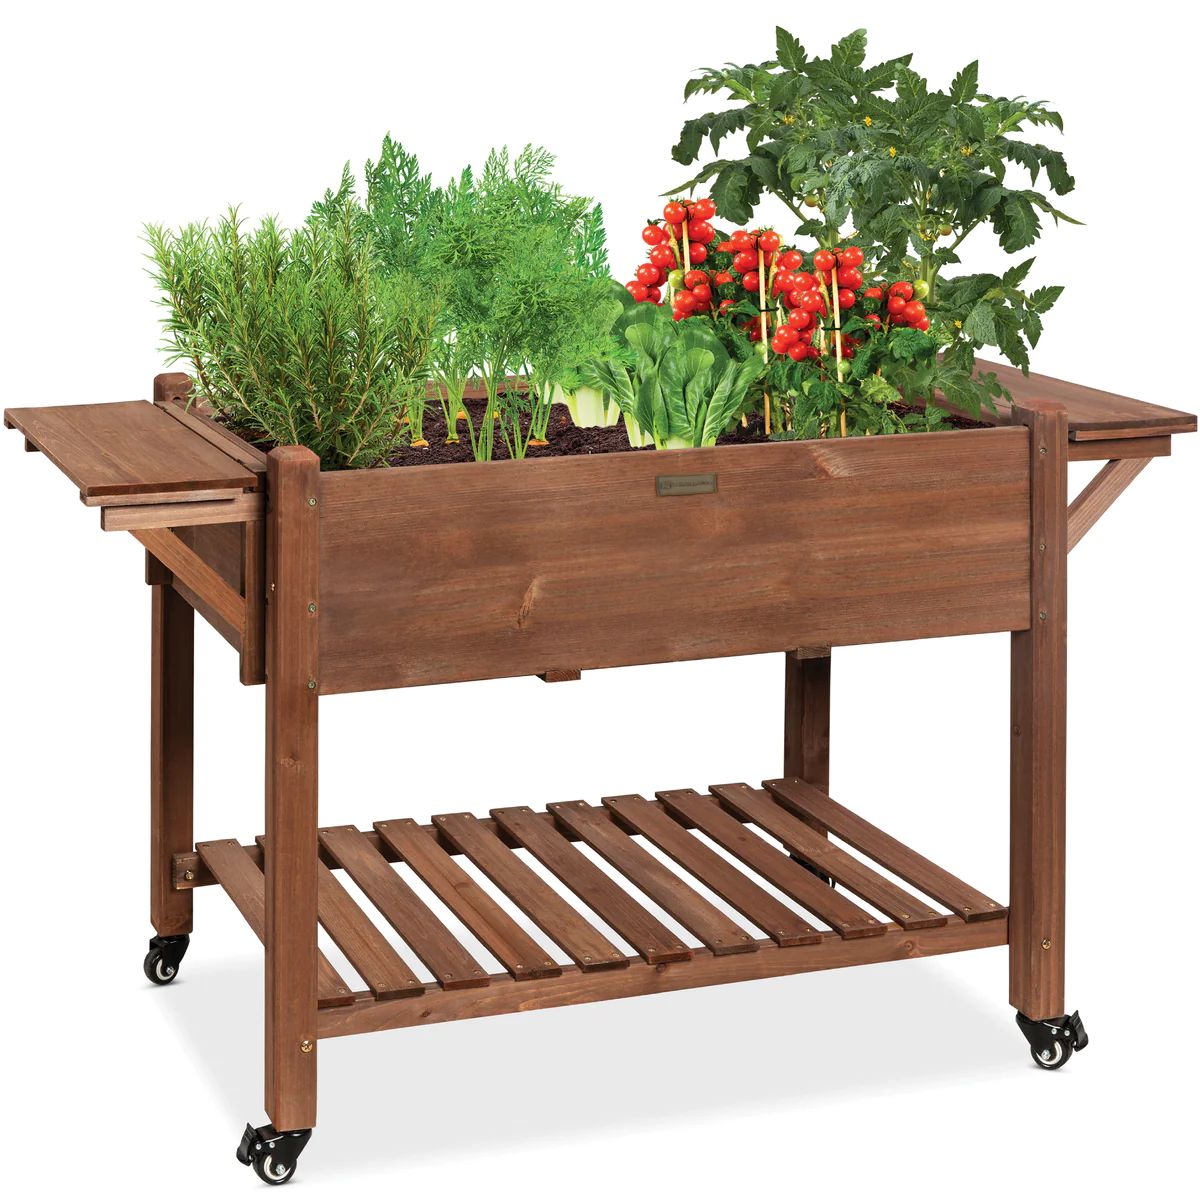 Pre-Stained Mobile Raised Garden Bed Elevated Wood Planter Stand 57x20x33in | Best Choice Products 